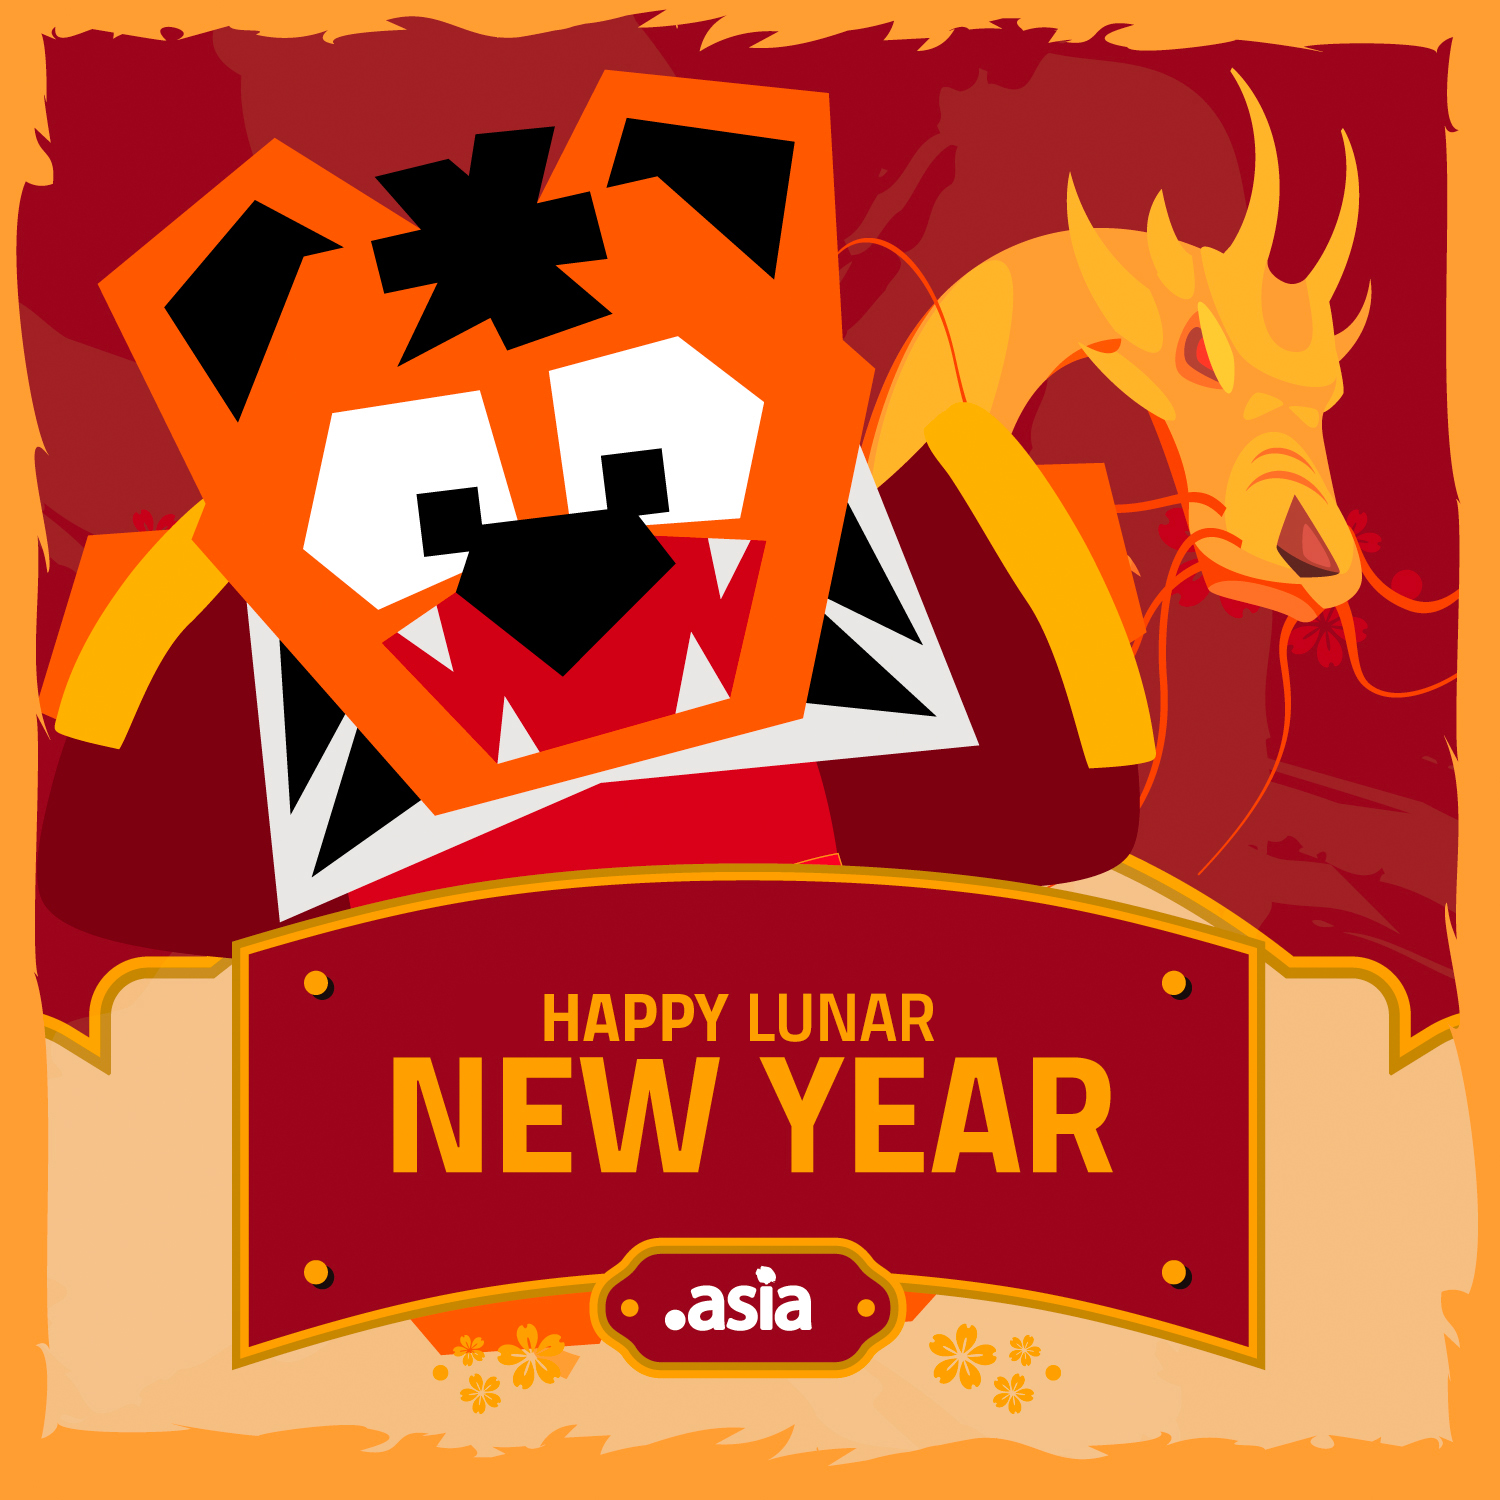 Image: DotAsia wishes the Asian community a Happy Year of the Dragon!